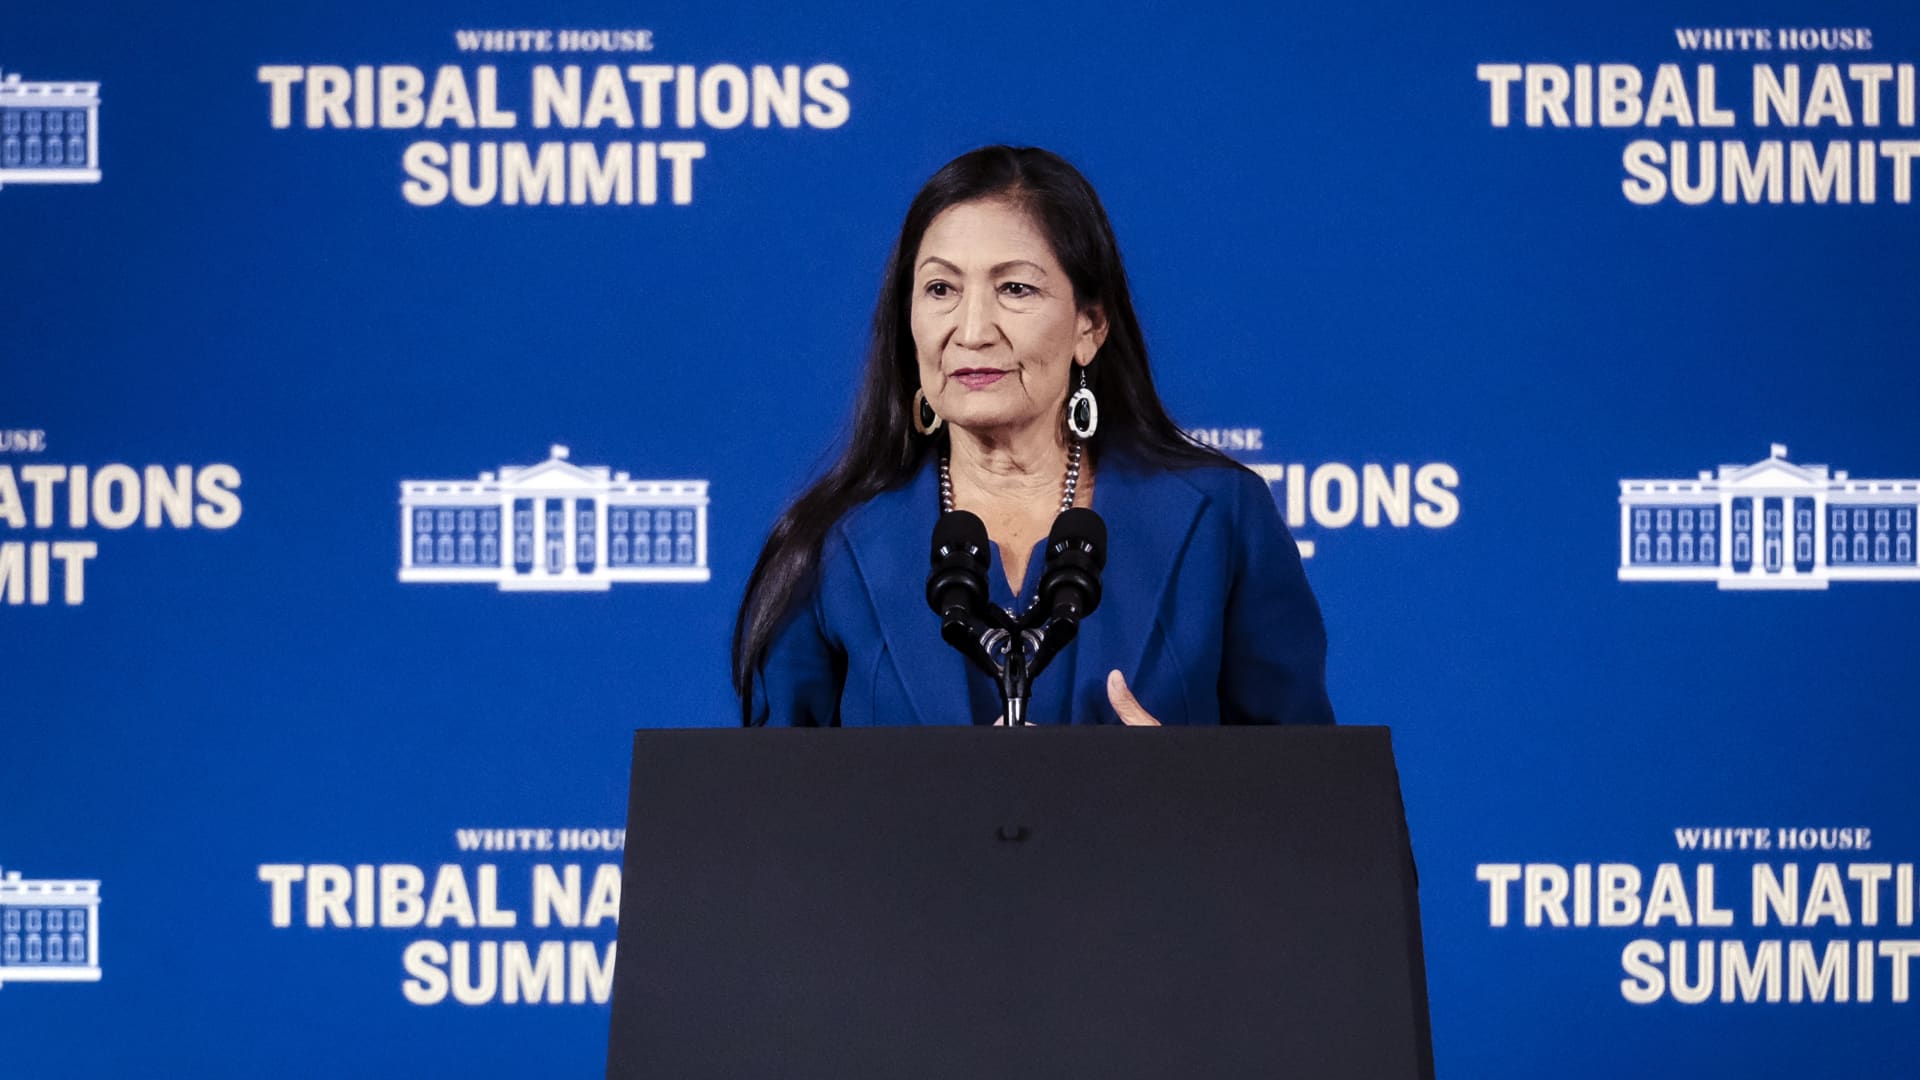 Department of the Interior Secretary Deb Haaland delivers opening remarks at the 2022 White House Tribal Nations Summit at the Department of the Interior on November 30, 2022 in Washington, DC.